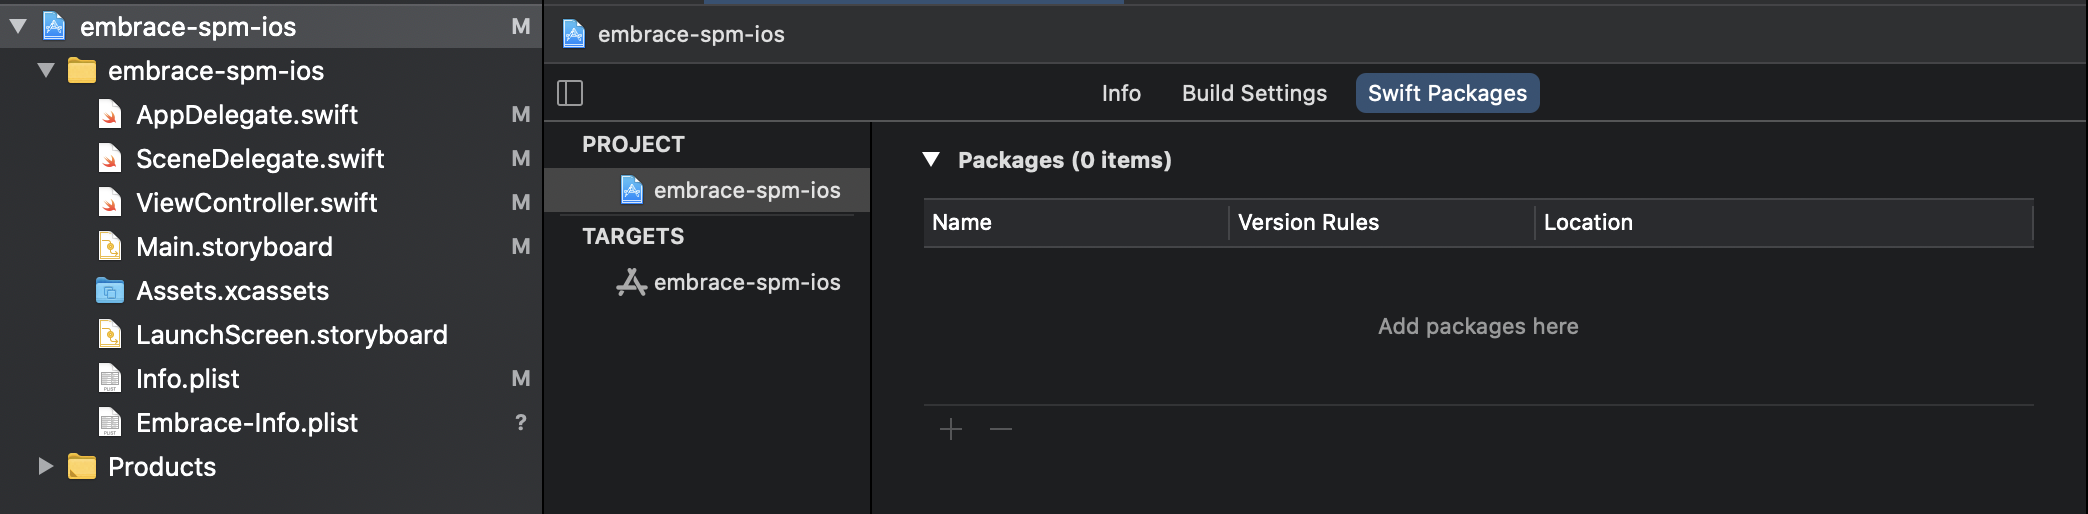 Xcode project ready to integrate Embrace via Swift Package Manager